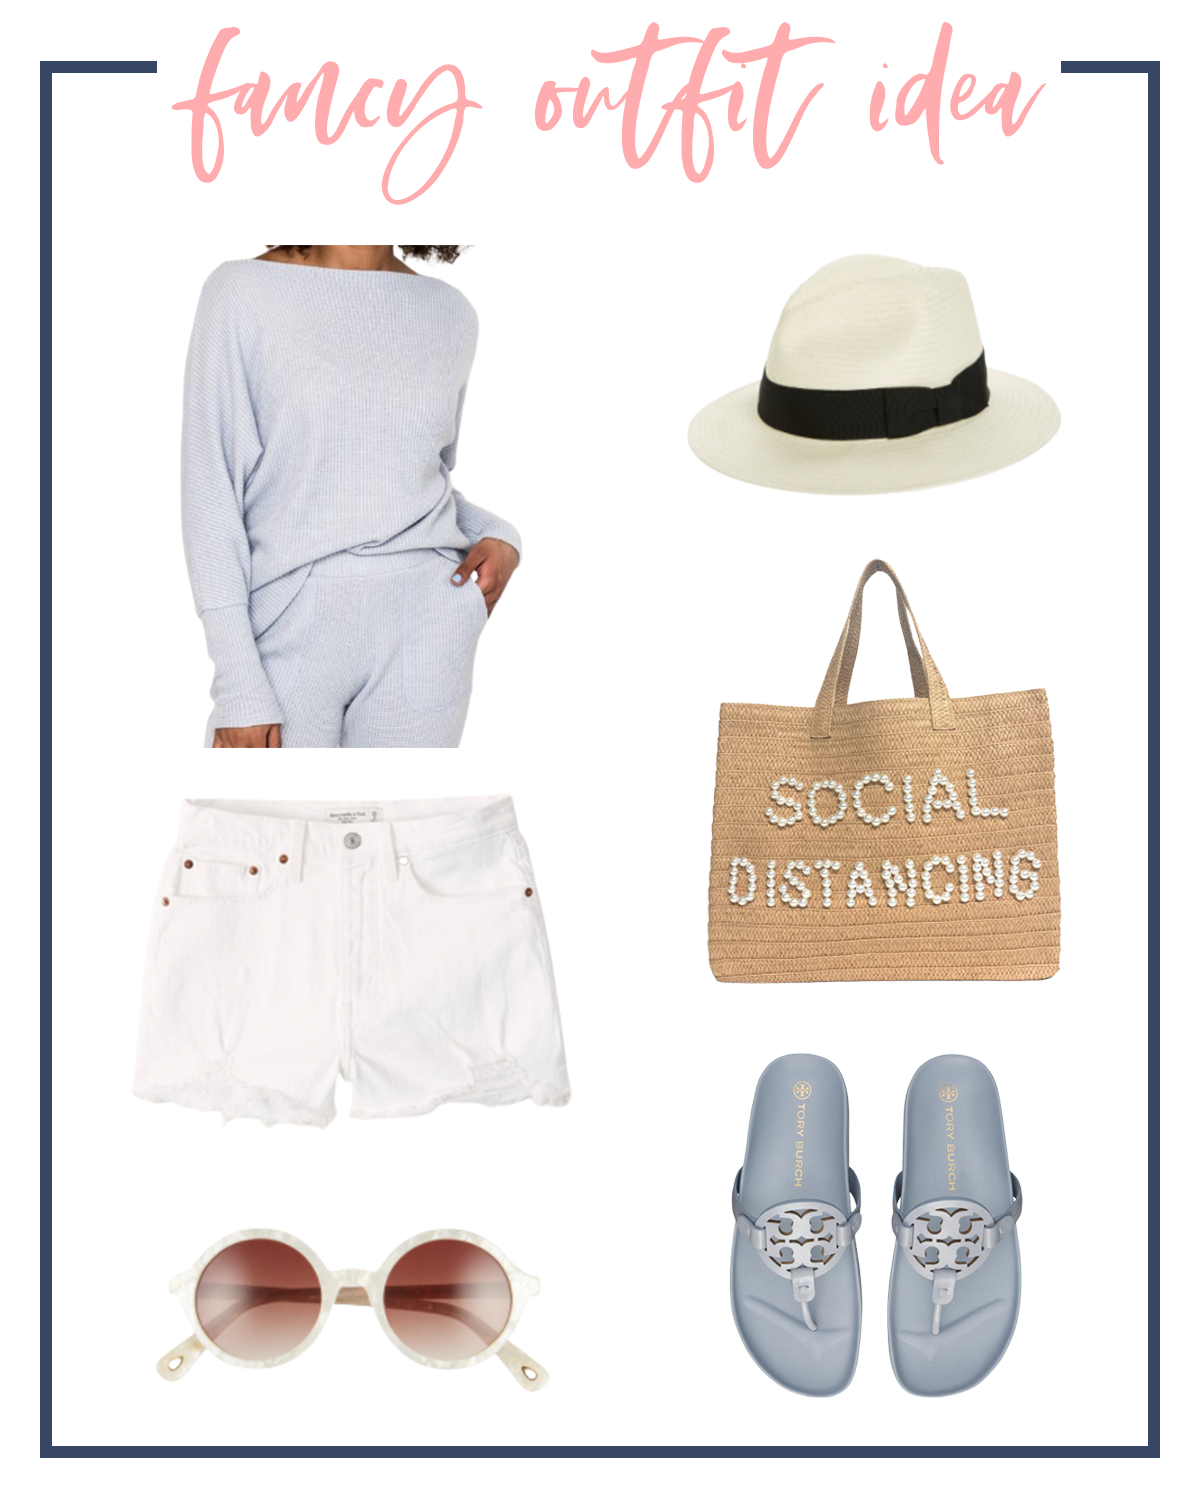 Denim Shorts by popular Houston fashion blog, Fancy Ashley: image of a grey rib knit blouse, white fedora hat, grey Tory Burch slide sandals, round frame sunglasses, white denim shorts, and a social distancing straw tote bag. 